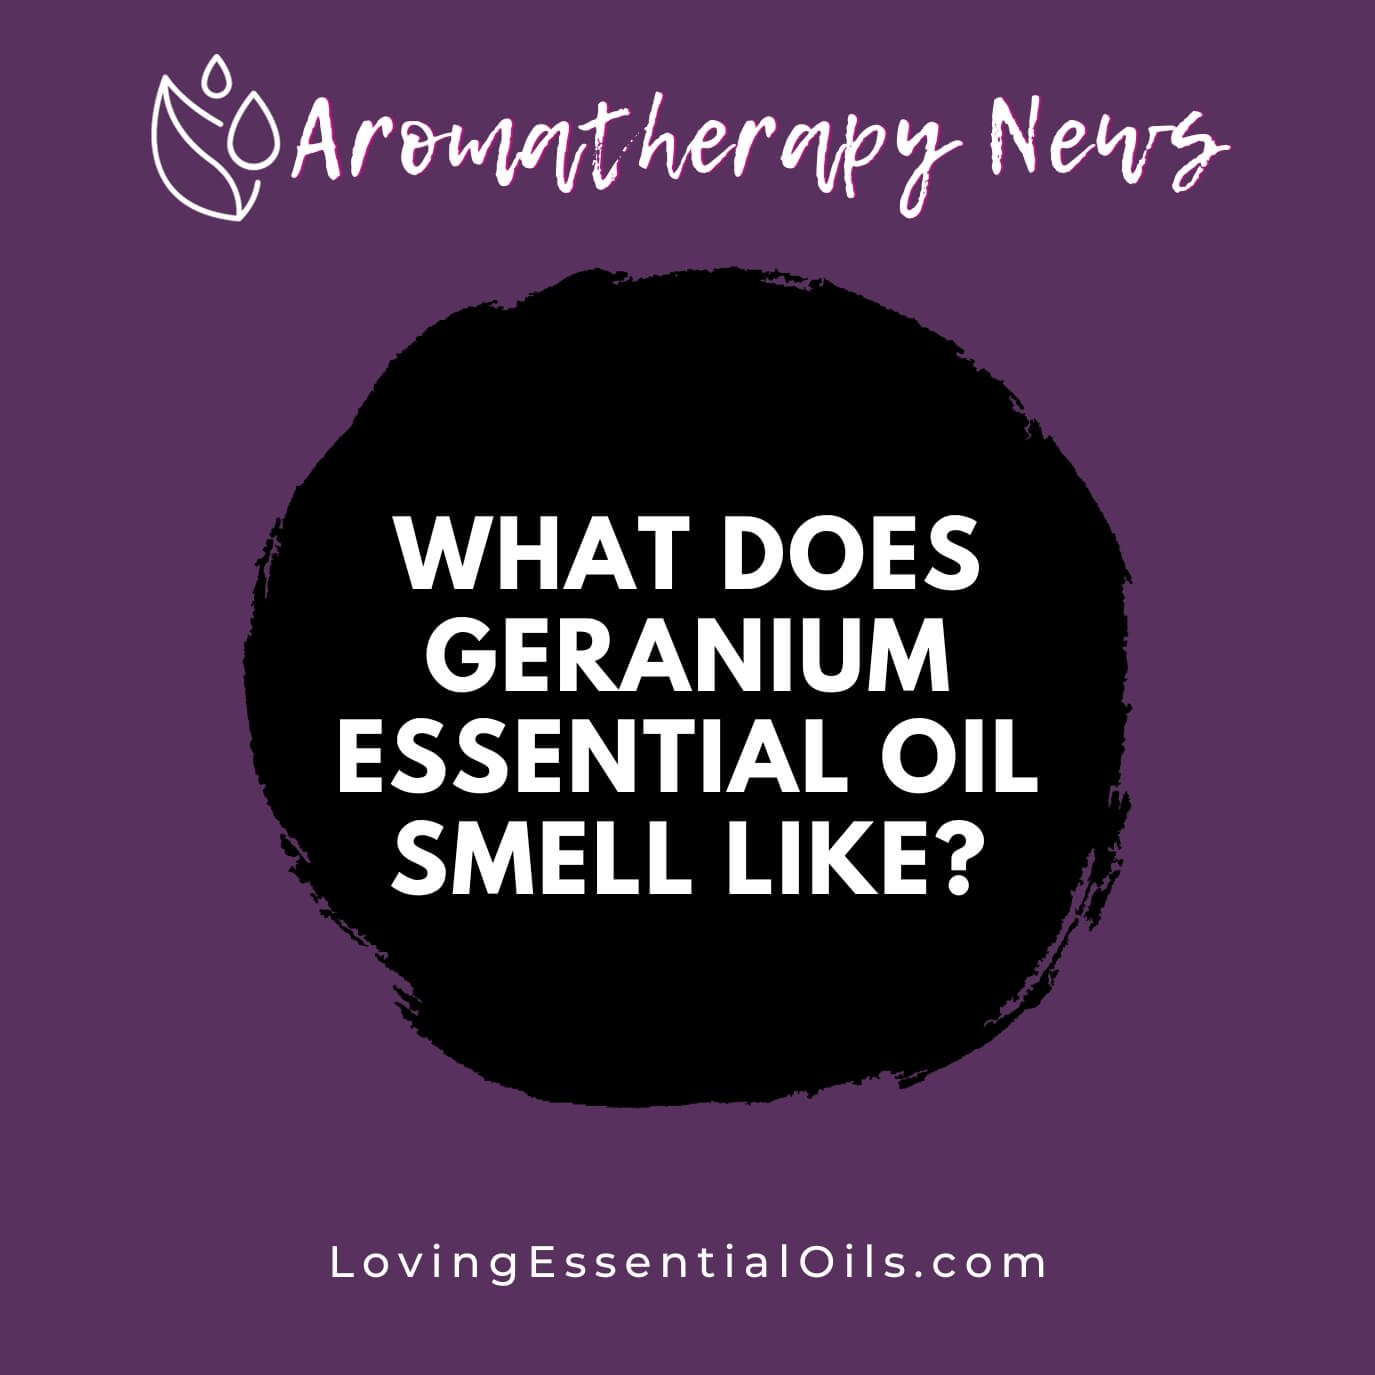 What Does Geranium Essential Oil Smell Like? With Emotional Benefits by Loving Essential Oils